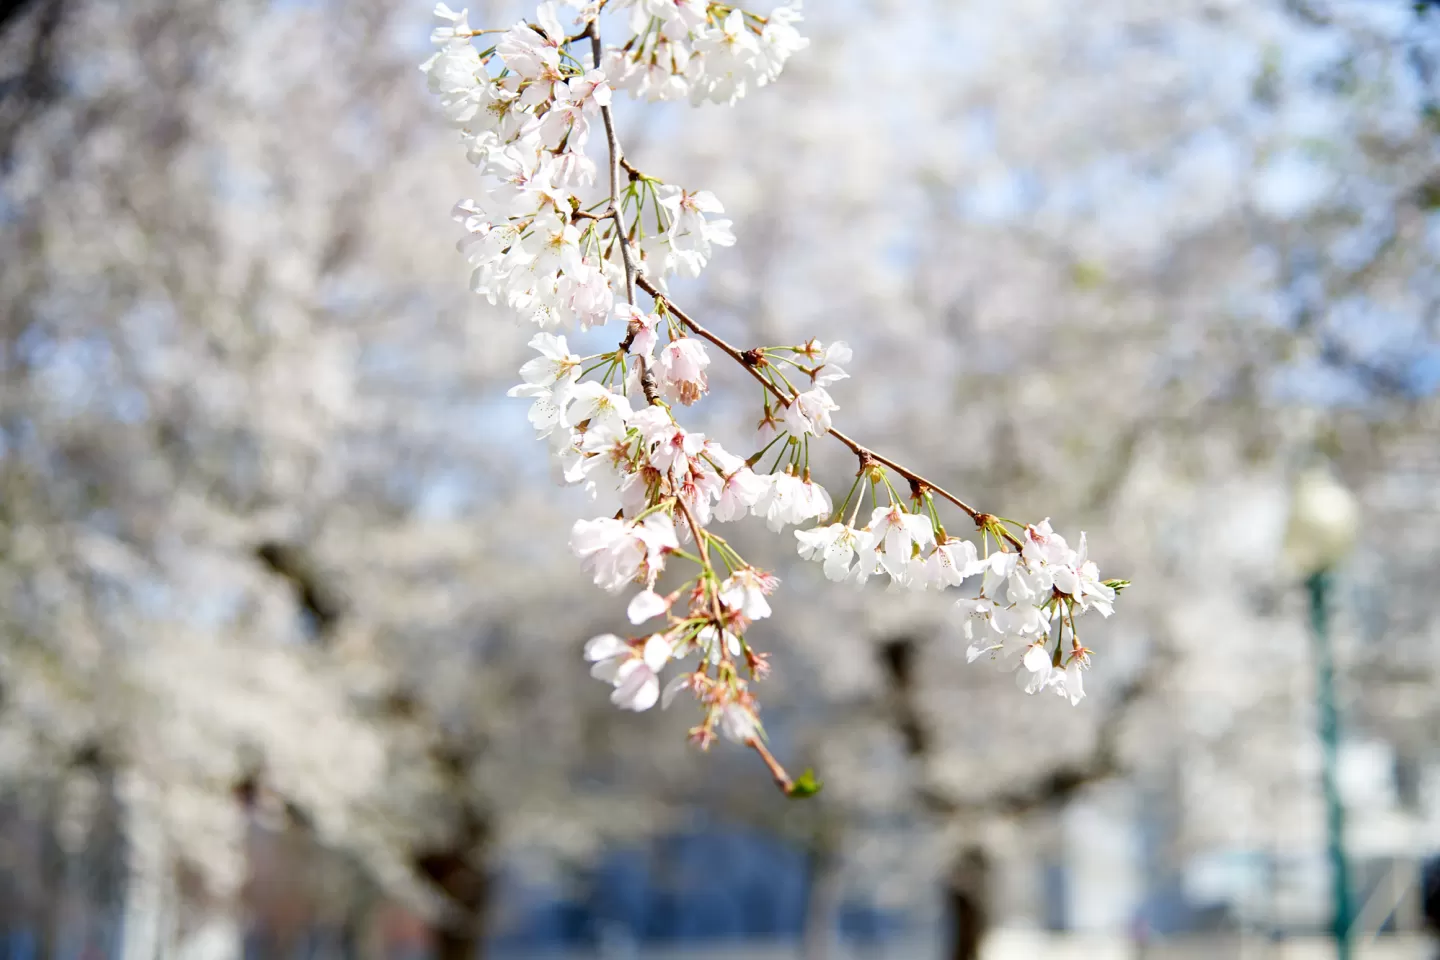 Up-close view of cherry blossoms near the U.S. Capitol.